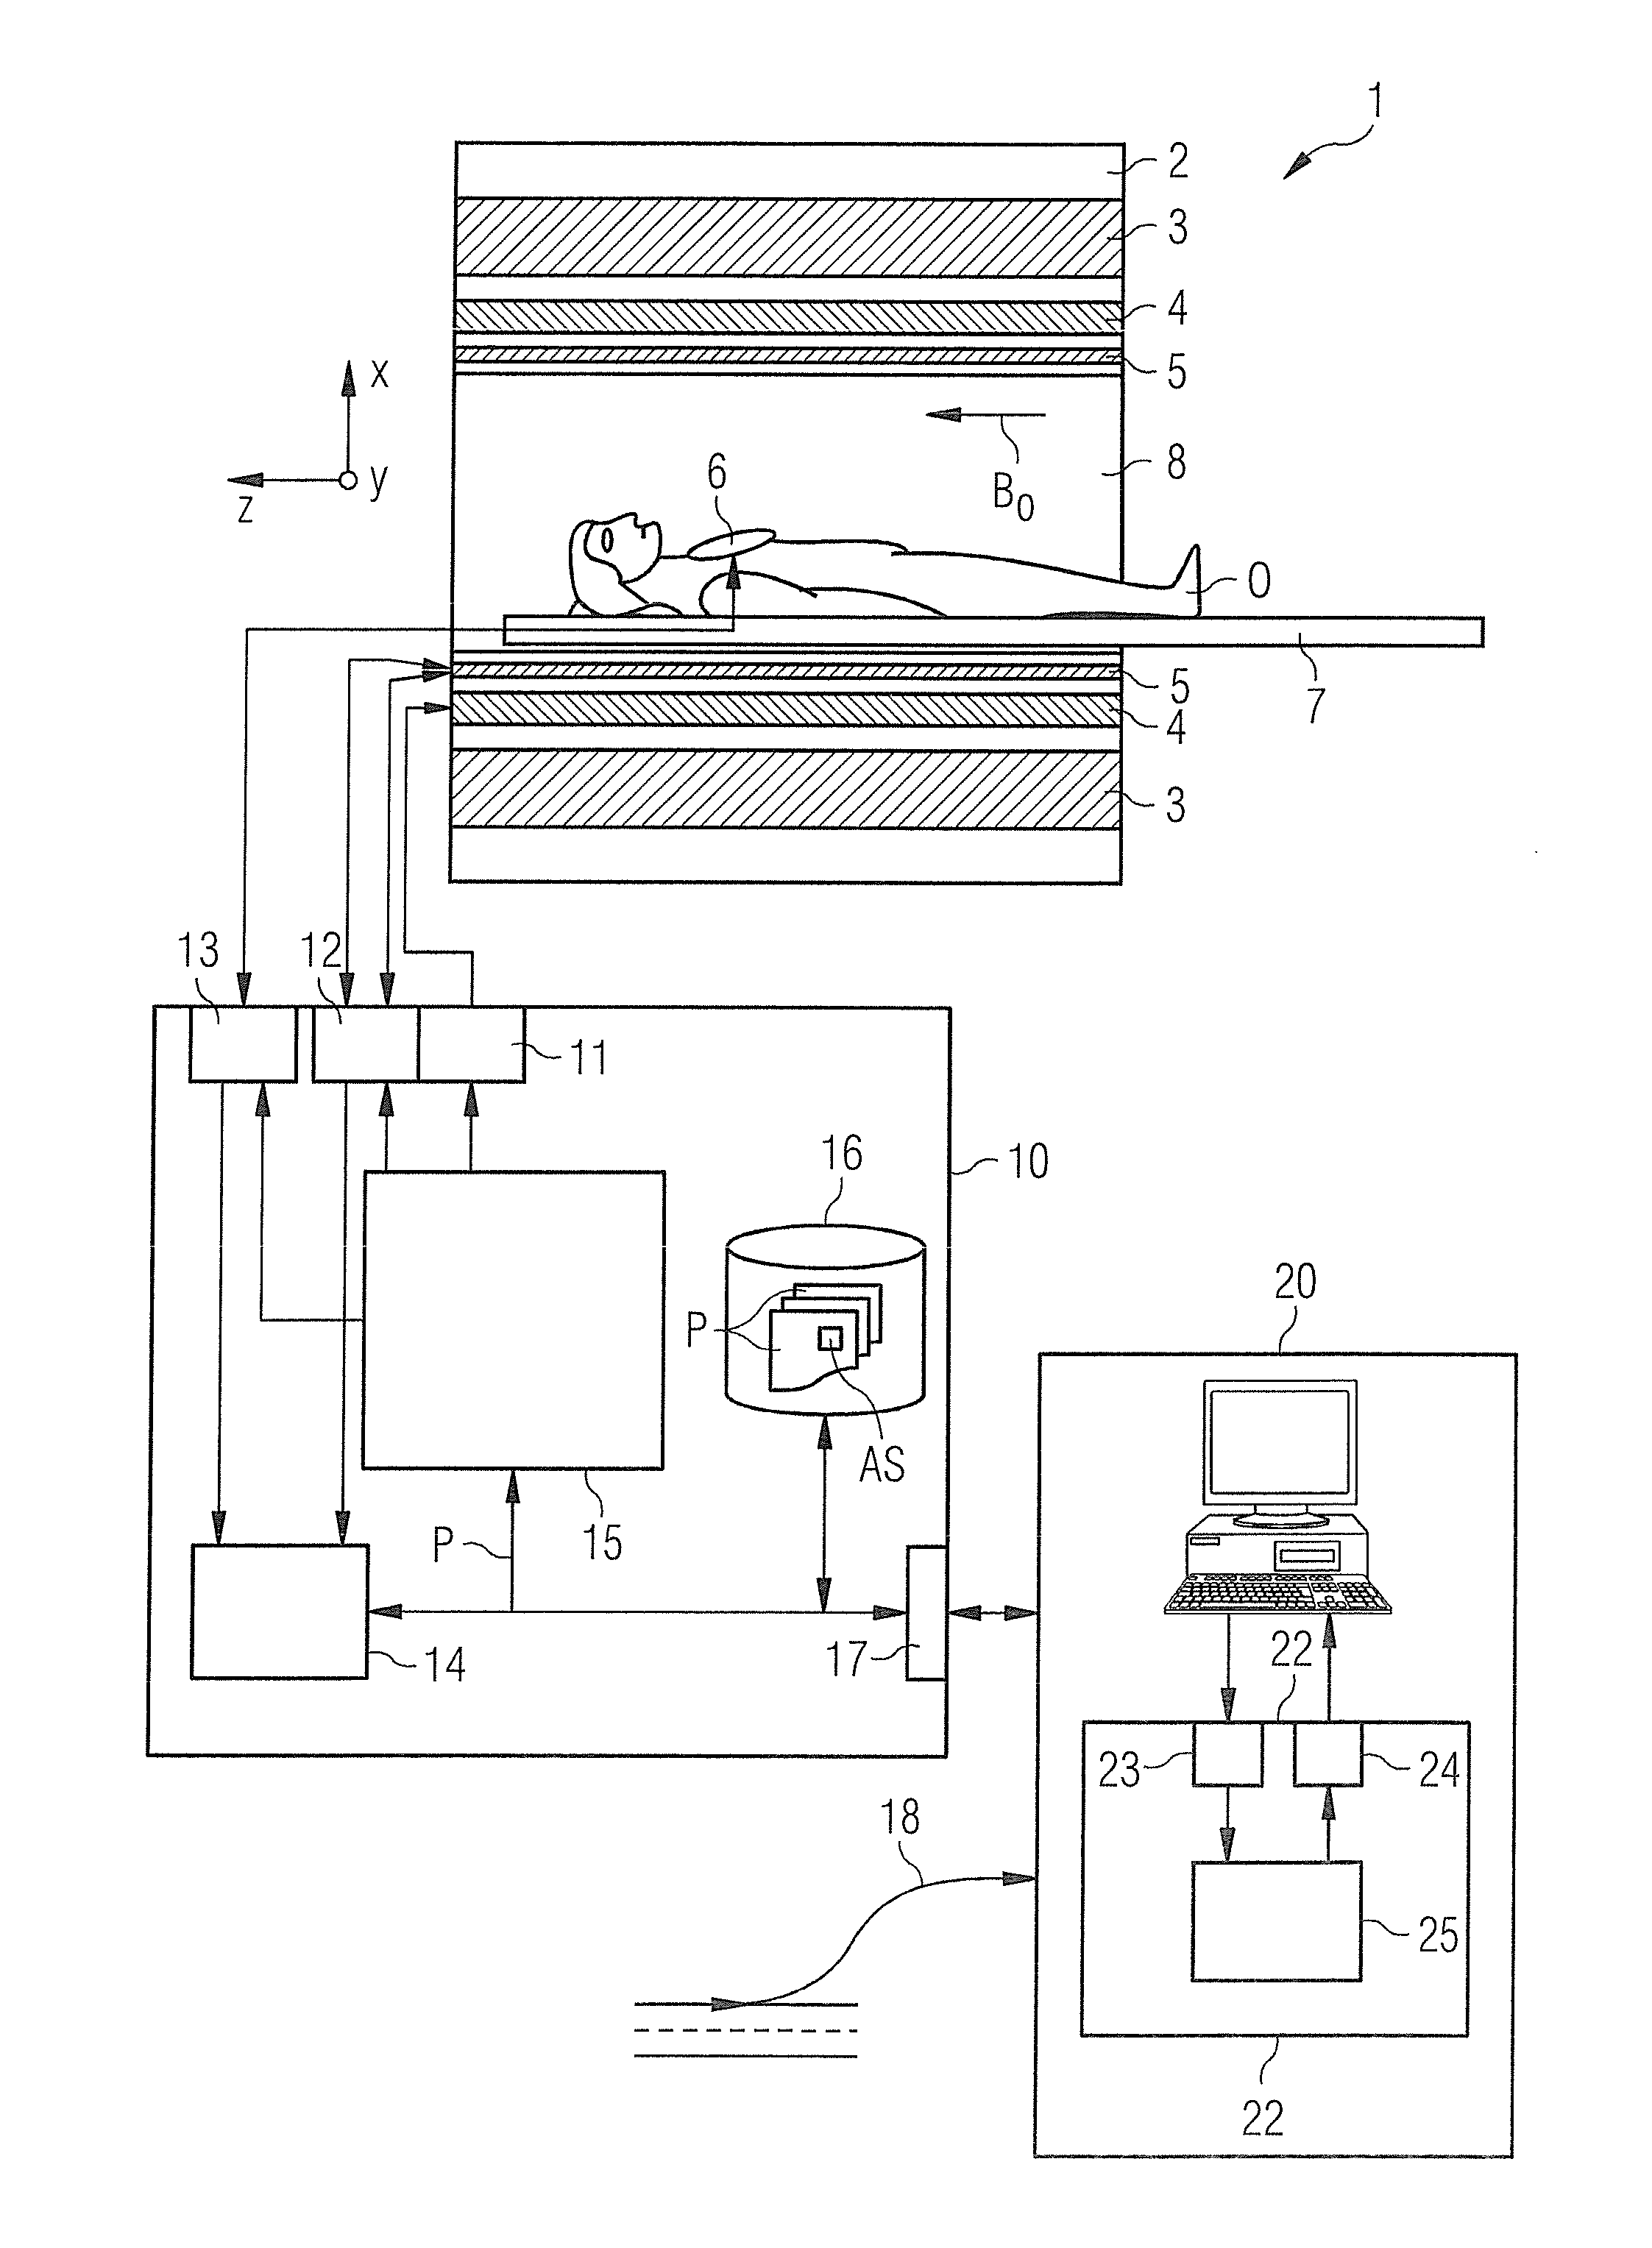 Determination of a control sequence for a magnetic resonance imaging system